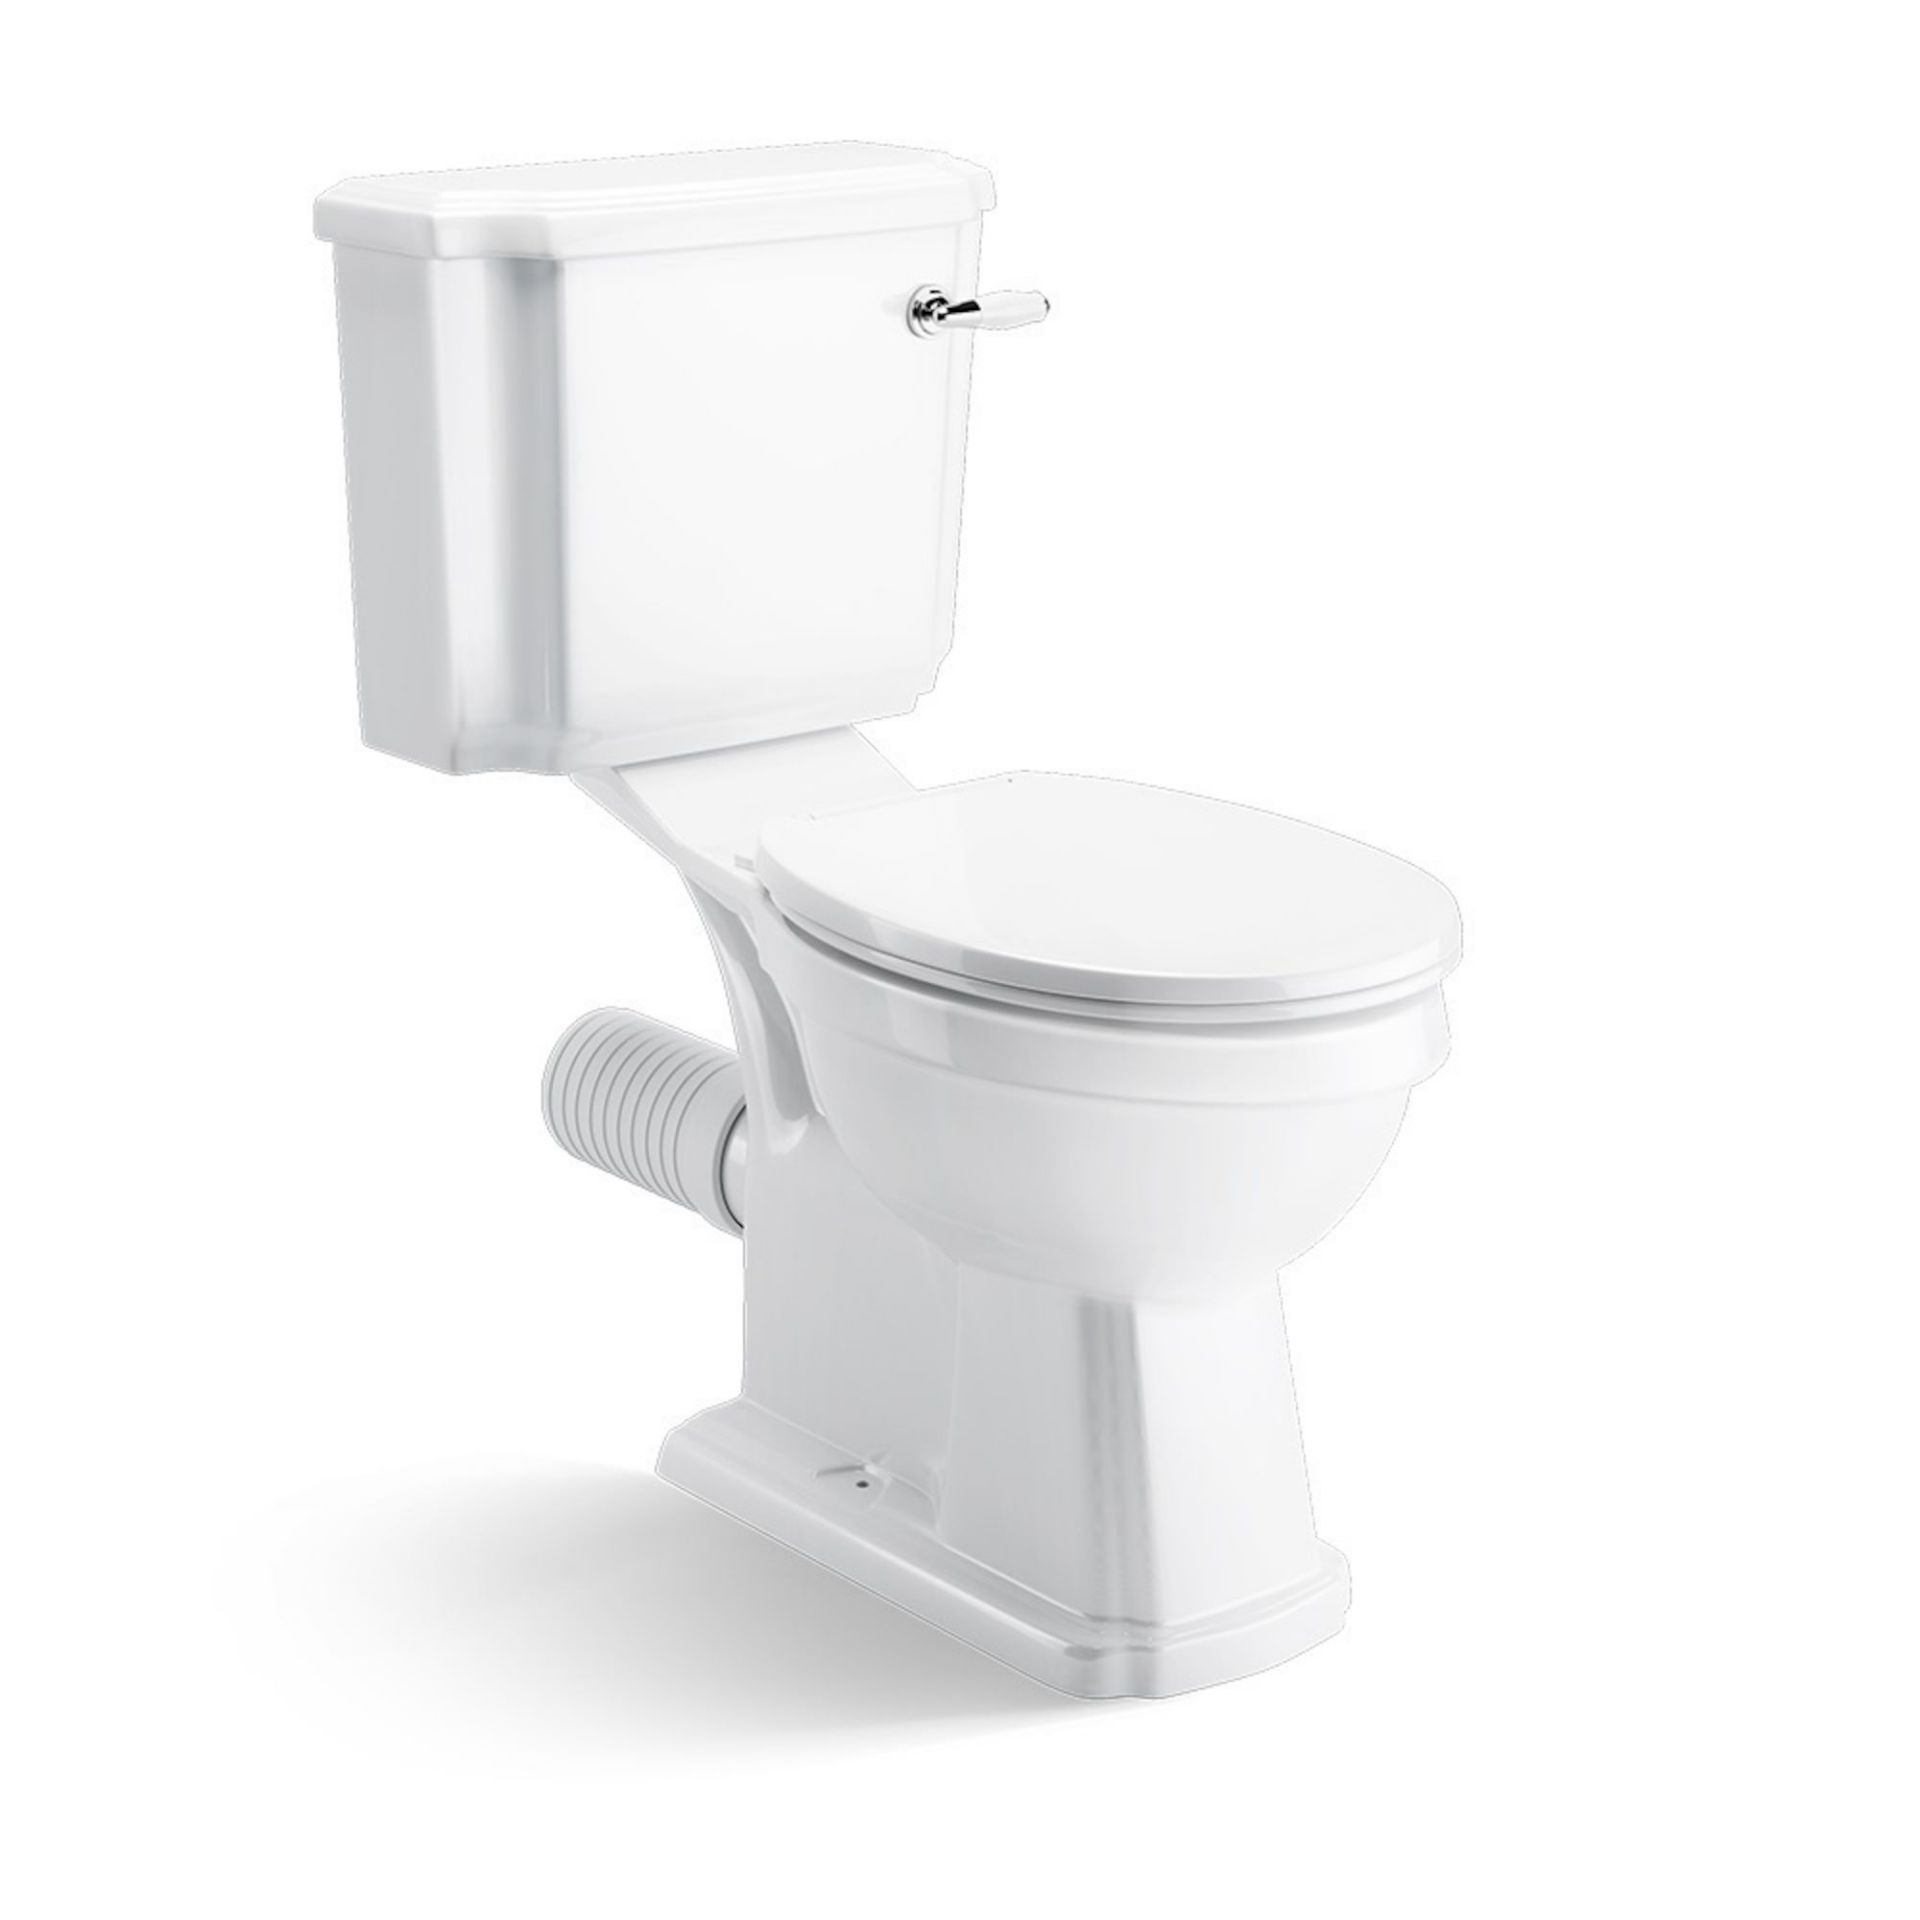 NEW & BOXED Cambridge Traditional Close Coupled Toilet & Cistern - White Seat. CCG629PAN.Tradi... - Image 2 of 3